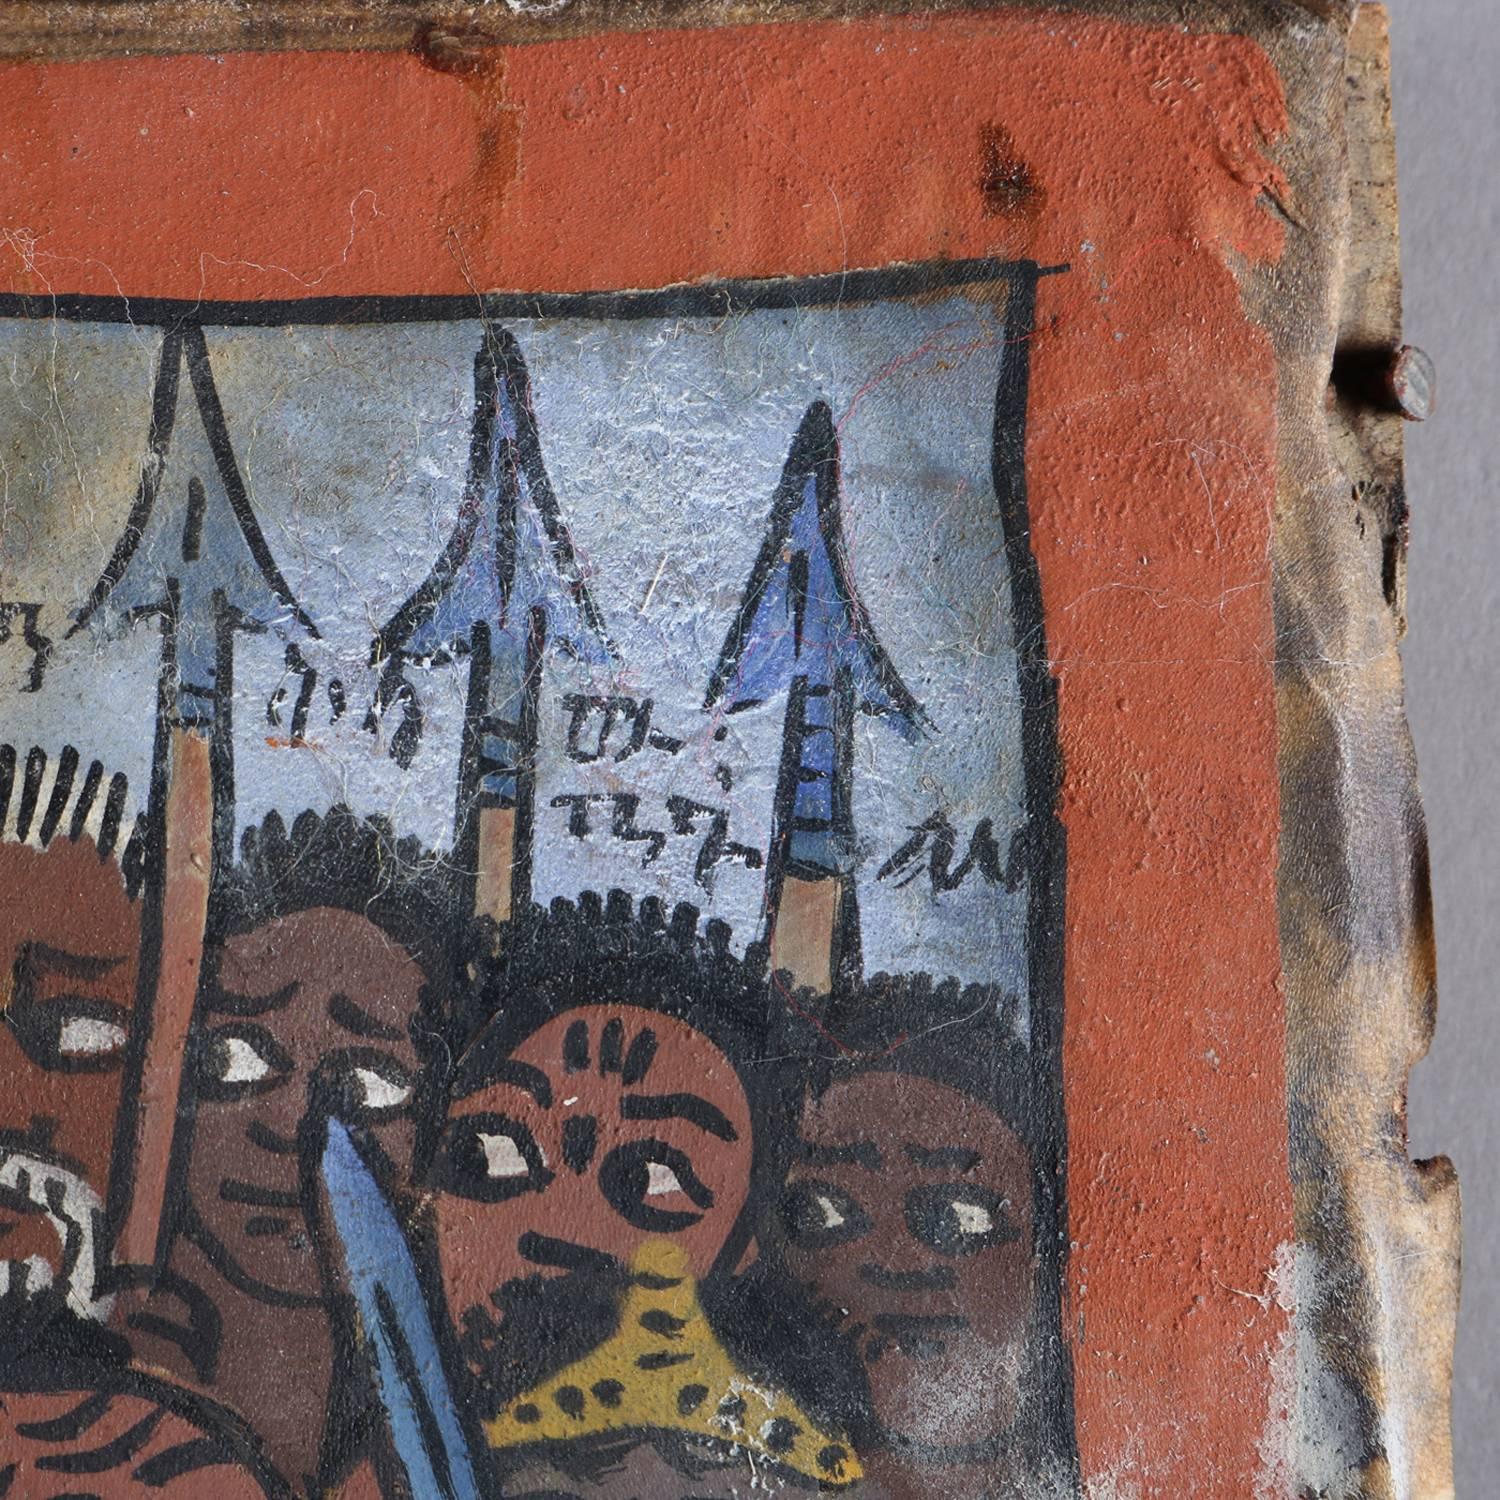 African tribal Folk Art painting features oil on hide depicting crusade battle scene between African nation and Europeans, unframed, 20th century.

***DELIVERY NOTICE – Due to COVID-19 we are employing NO-CONTACT PRACTICES in the transfer of